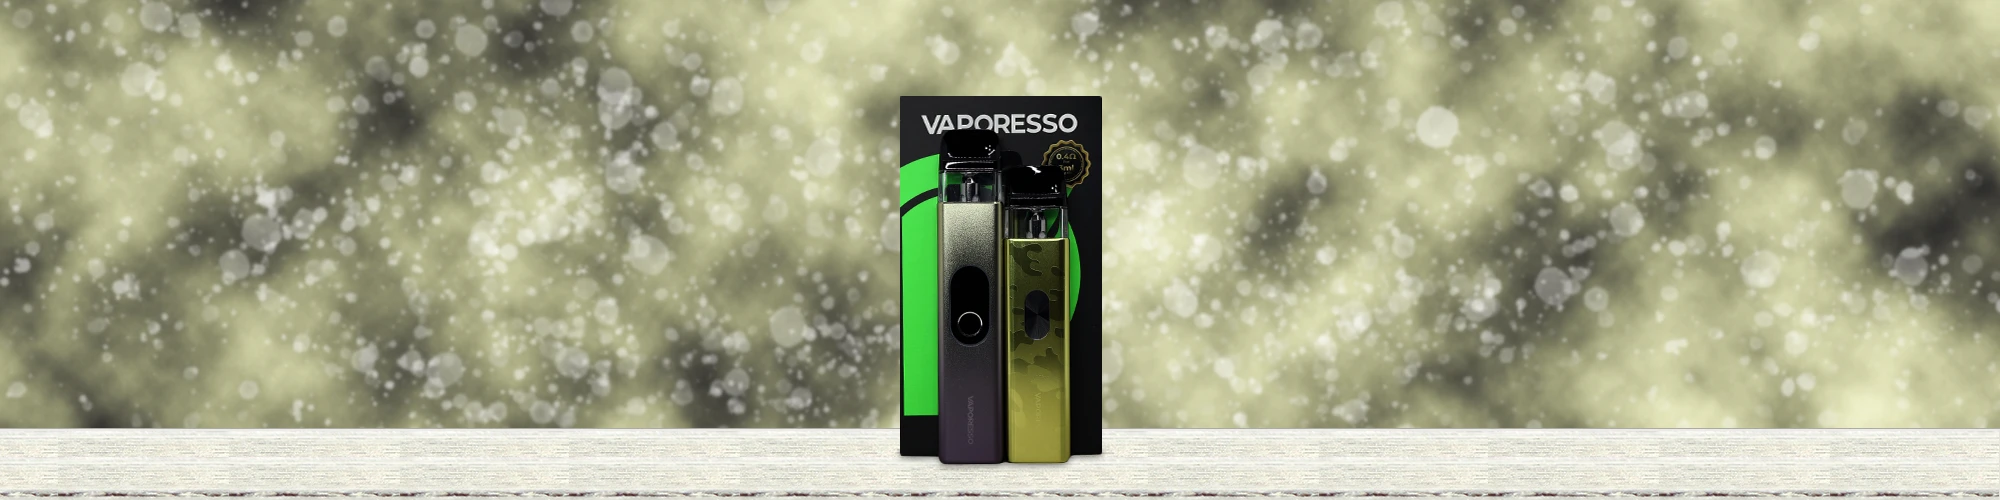 VAPORESSO XROS 4 and XROS 4 MINI Review Main Banner